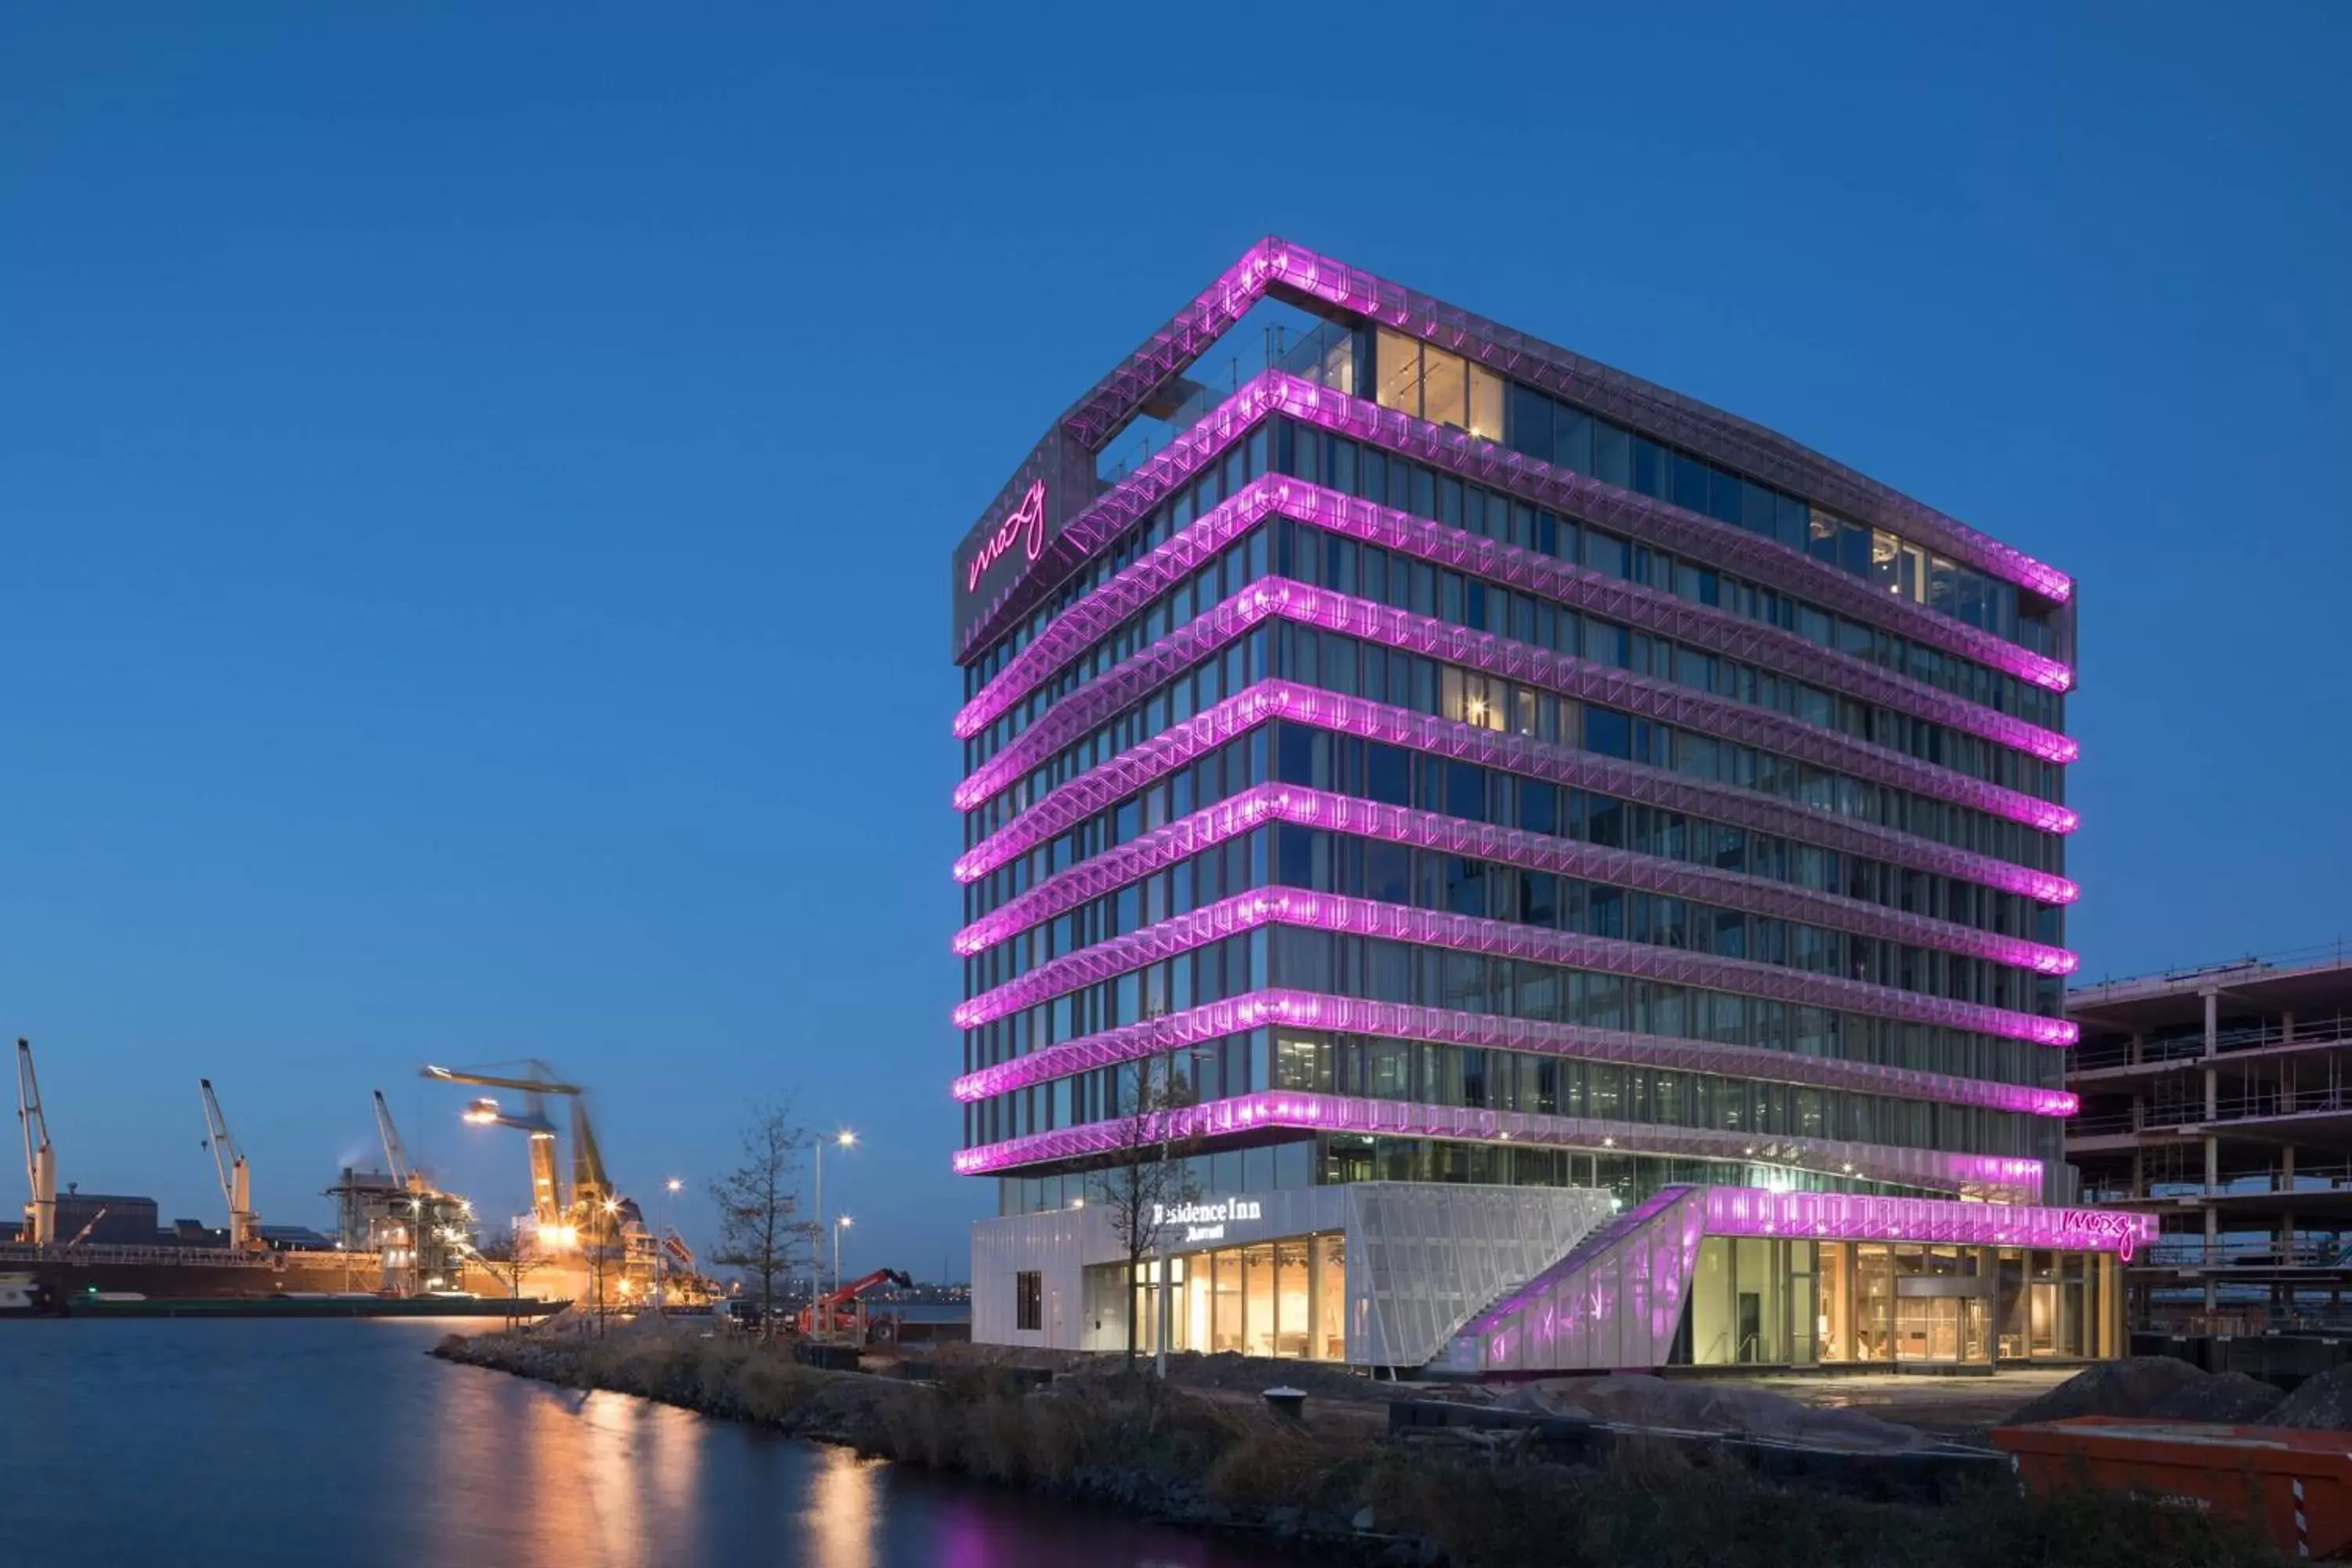 Property Building in Residence Inn by Marriott Amsterdam Houthavens